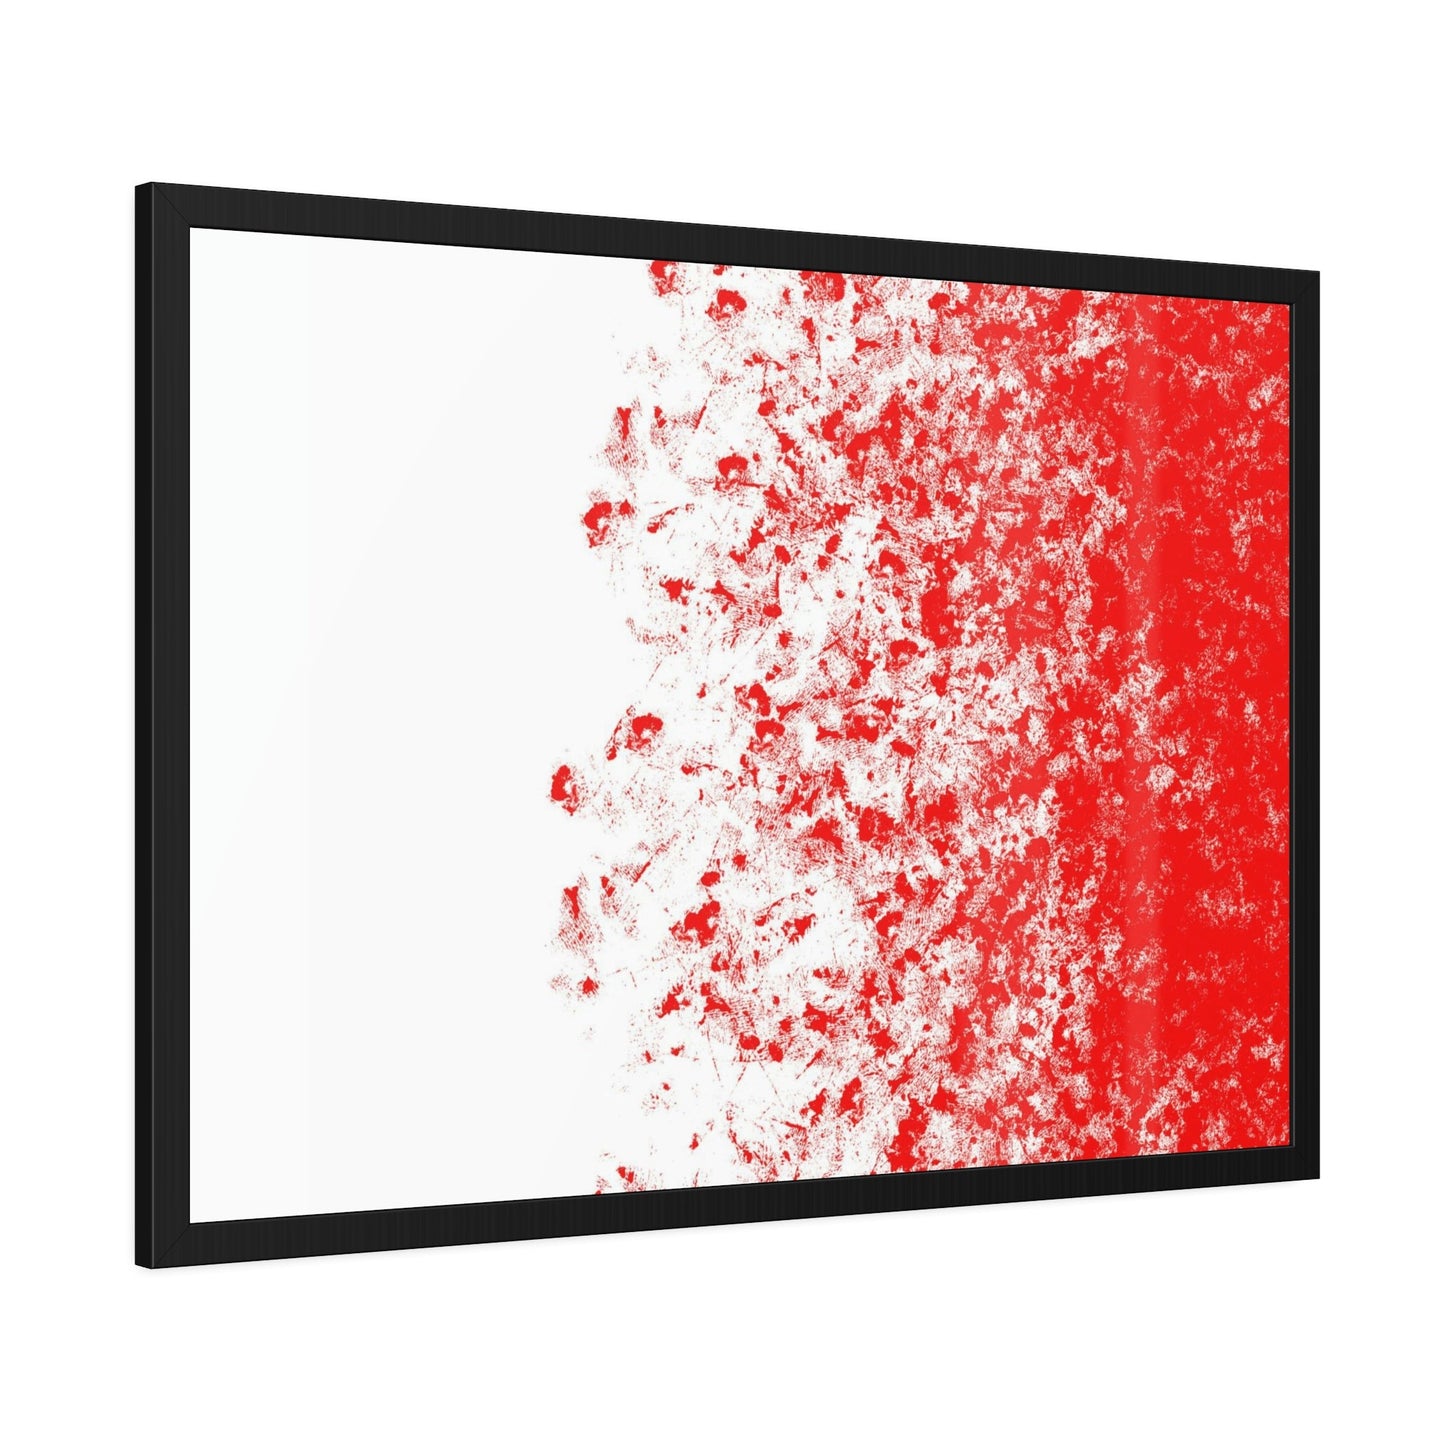 The Art of Warmth: Red Abstract Framed Posters and Print on Canvas